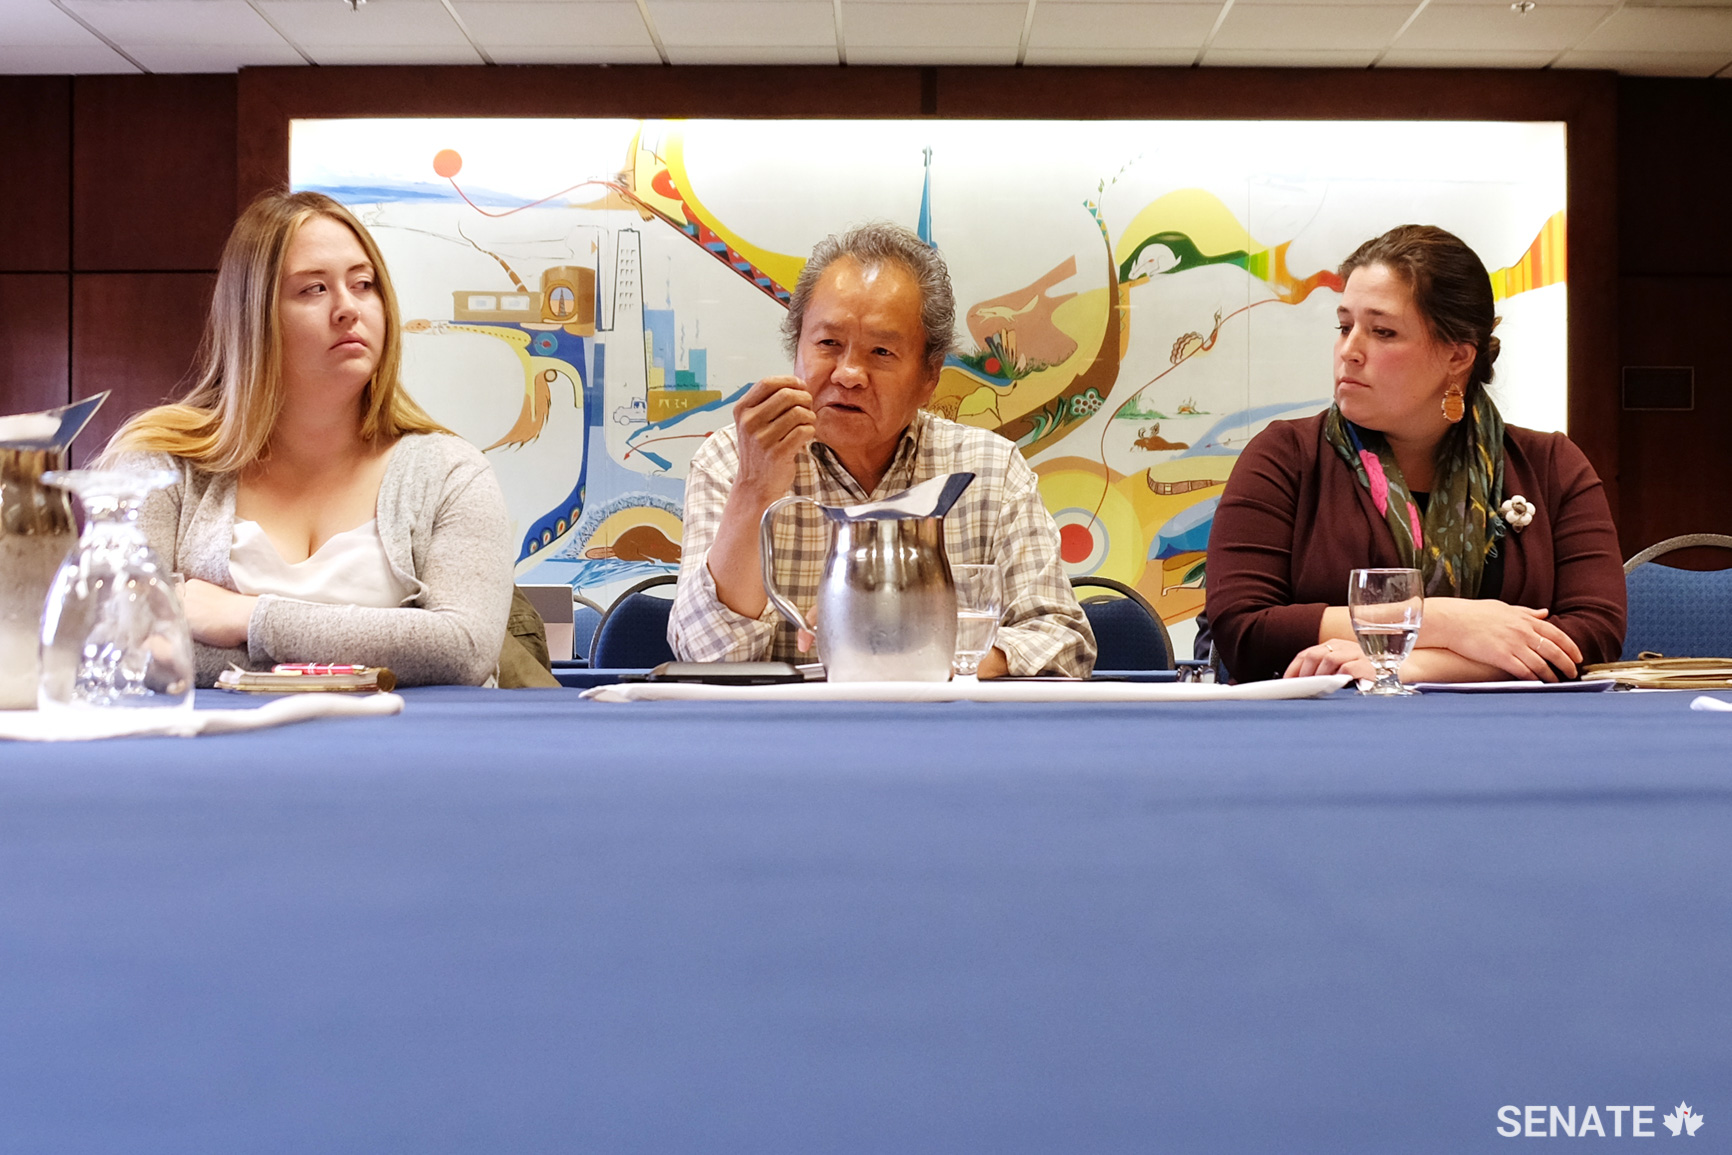 From left, Dechinta Centre for Research and Learning alumna Jasmine Vogt, elder and professor Samual Gargan, and Dechinta’s policy and programming director Kelsey R. Wrightson speak with senators about the school’s culturally relevant, land-based programming for Indigenous students in Yellowknife, N.W.T. The group’s federal funding was cut this year due to changes to the Post-Secondary Student Support Program. They said the precarious funding situation makes it difficult for students to plan for their future.